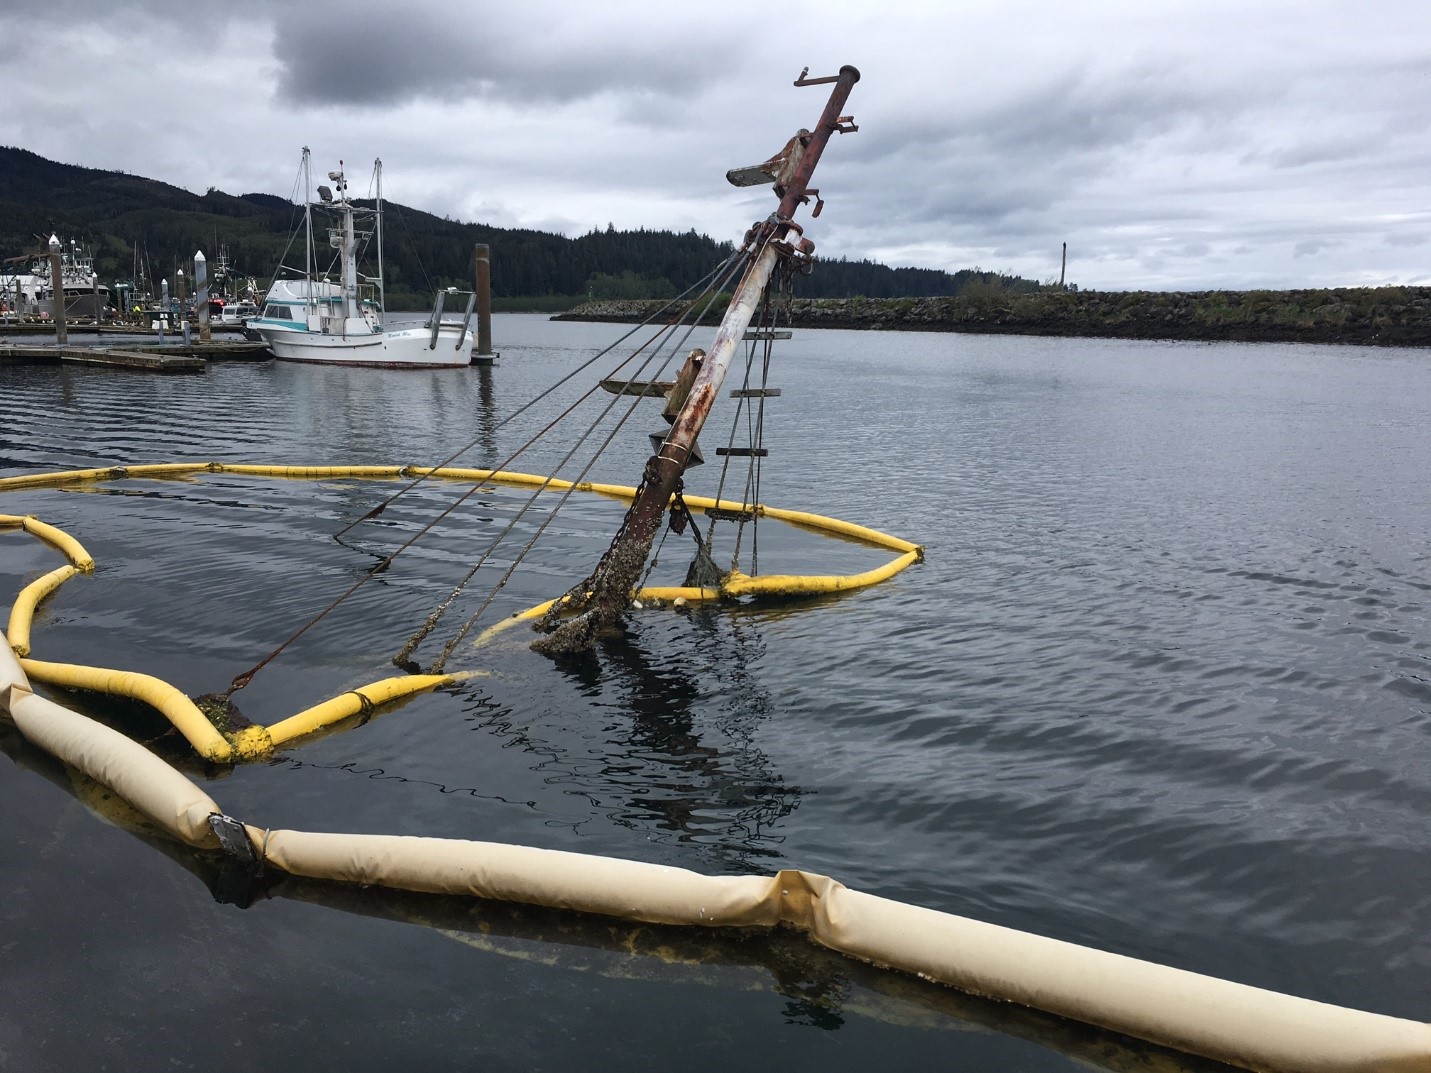 Mast of a vessel extending out of water with boom surrounding.